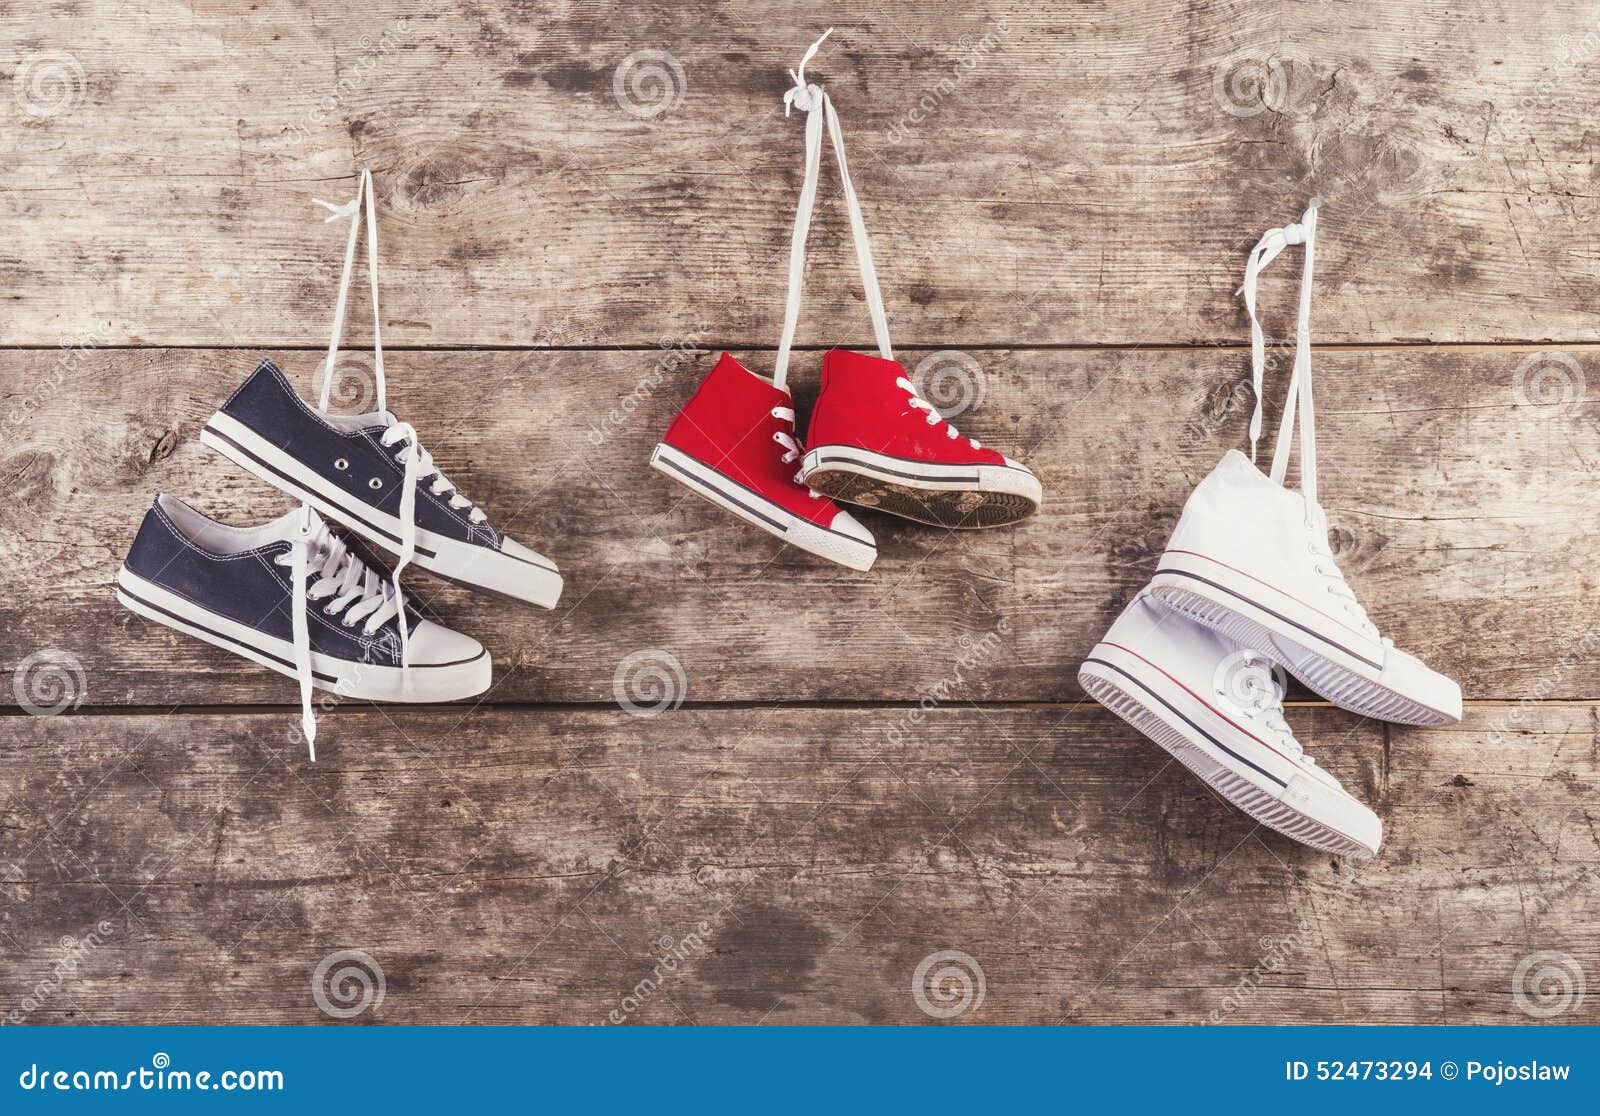 Sports shoes on the floor stock photo. Image of classic - 52473294